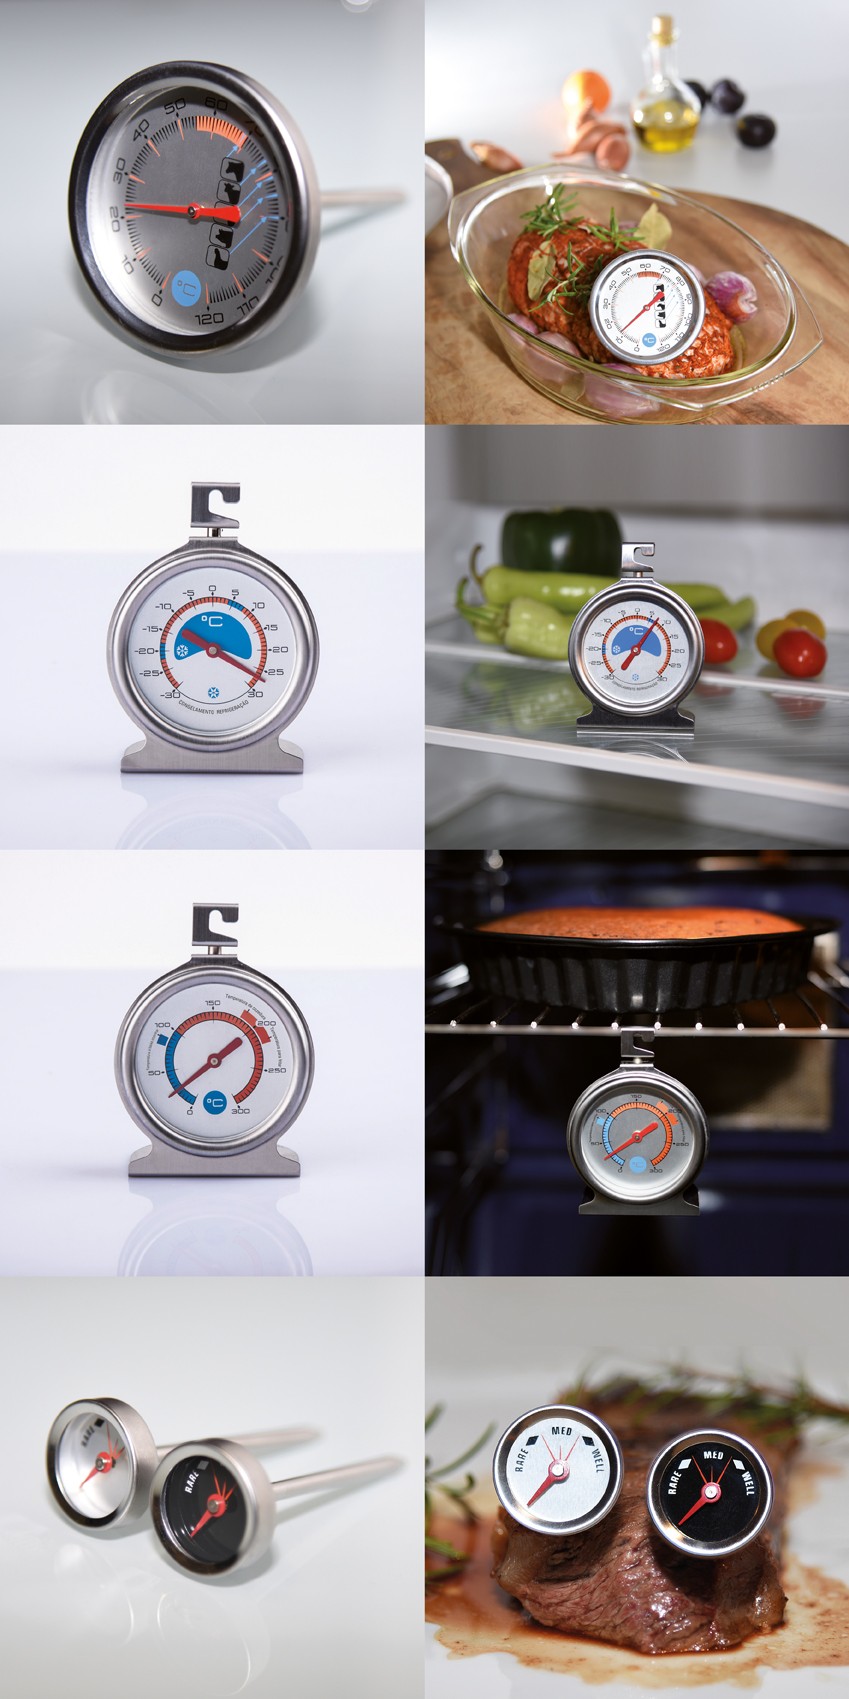 product | NINGBO CMC | Dials for stainless steel thermometers_Design and photography